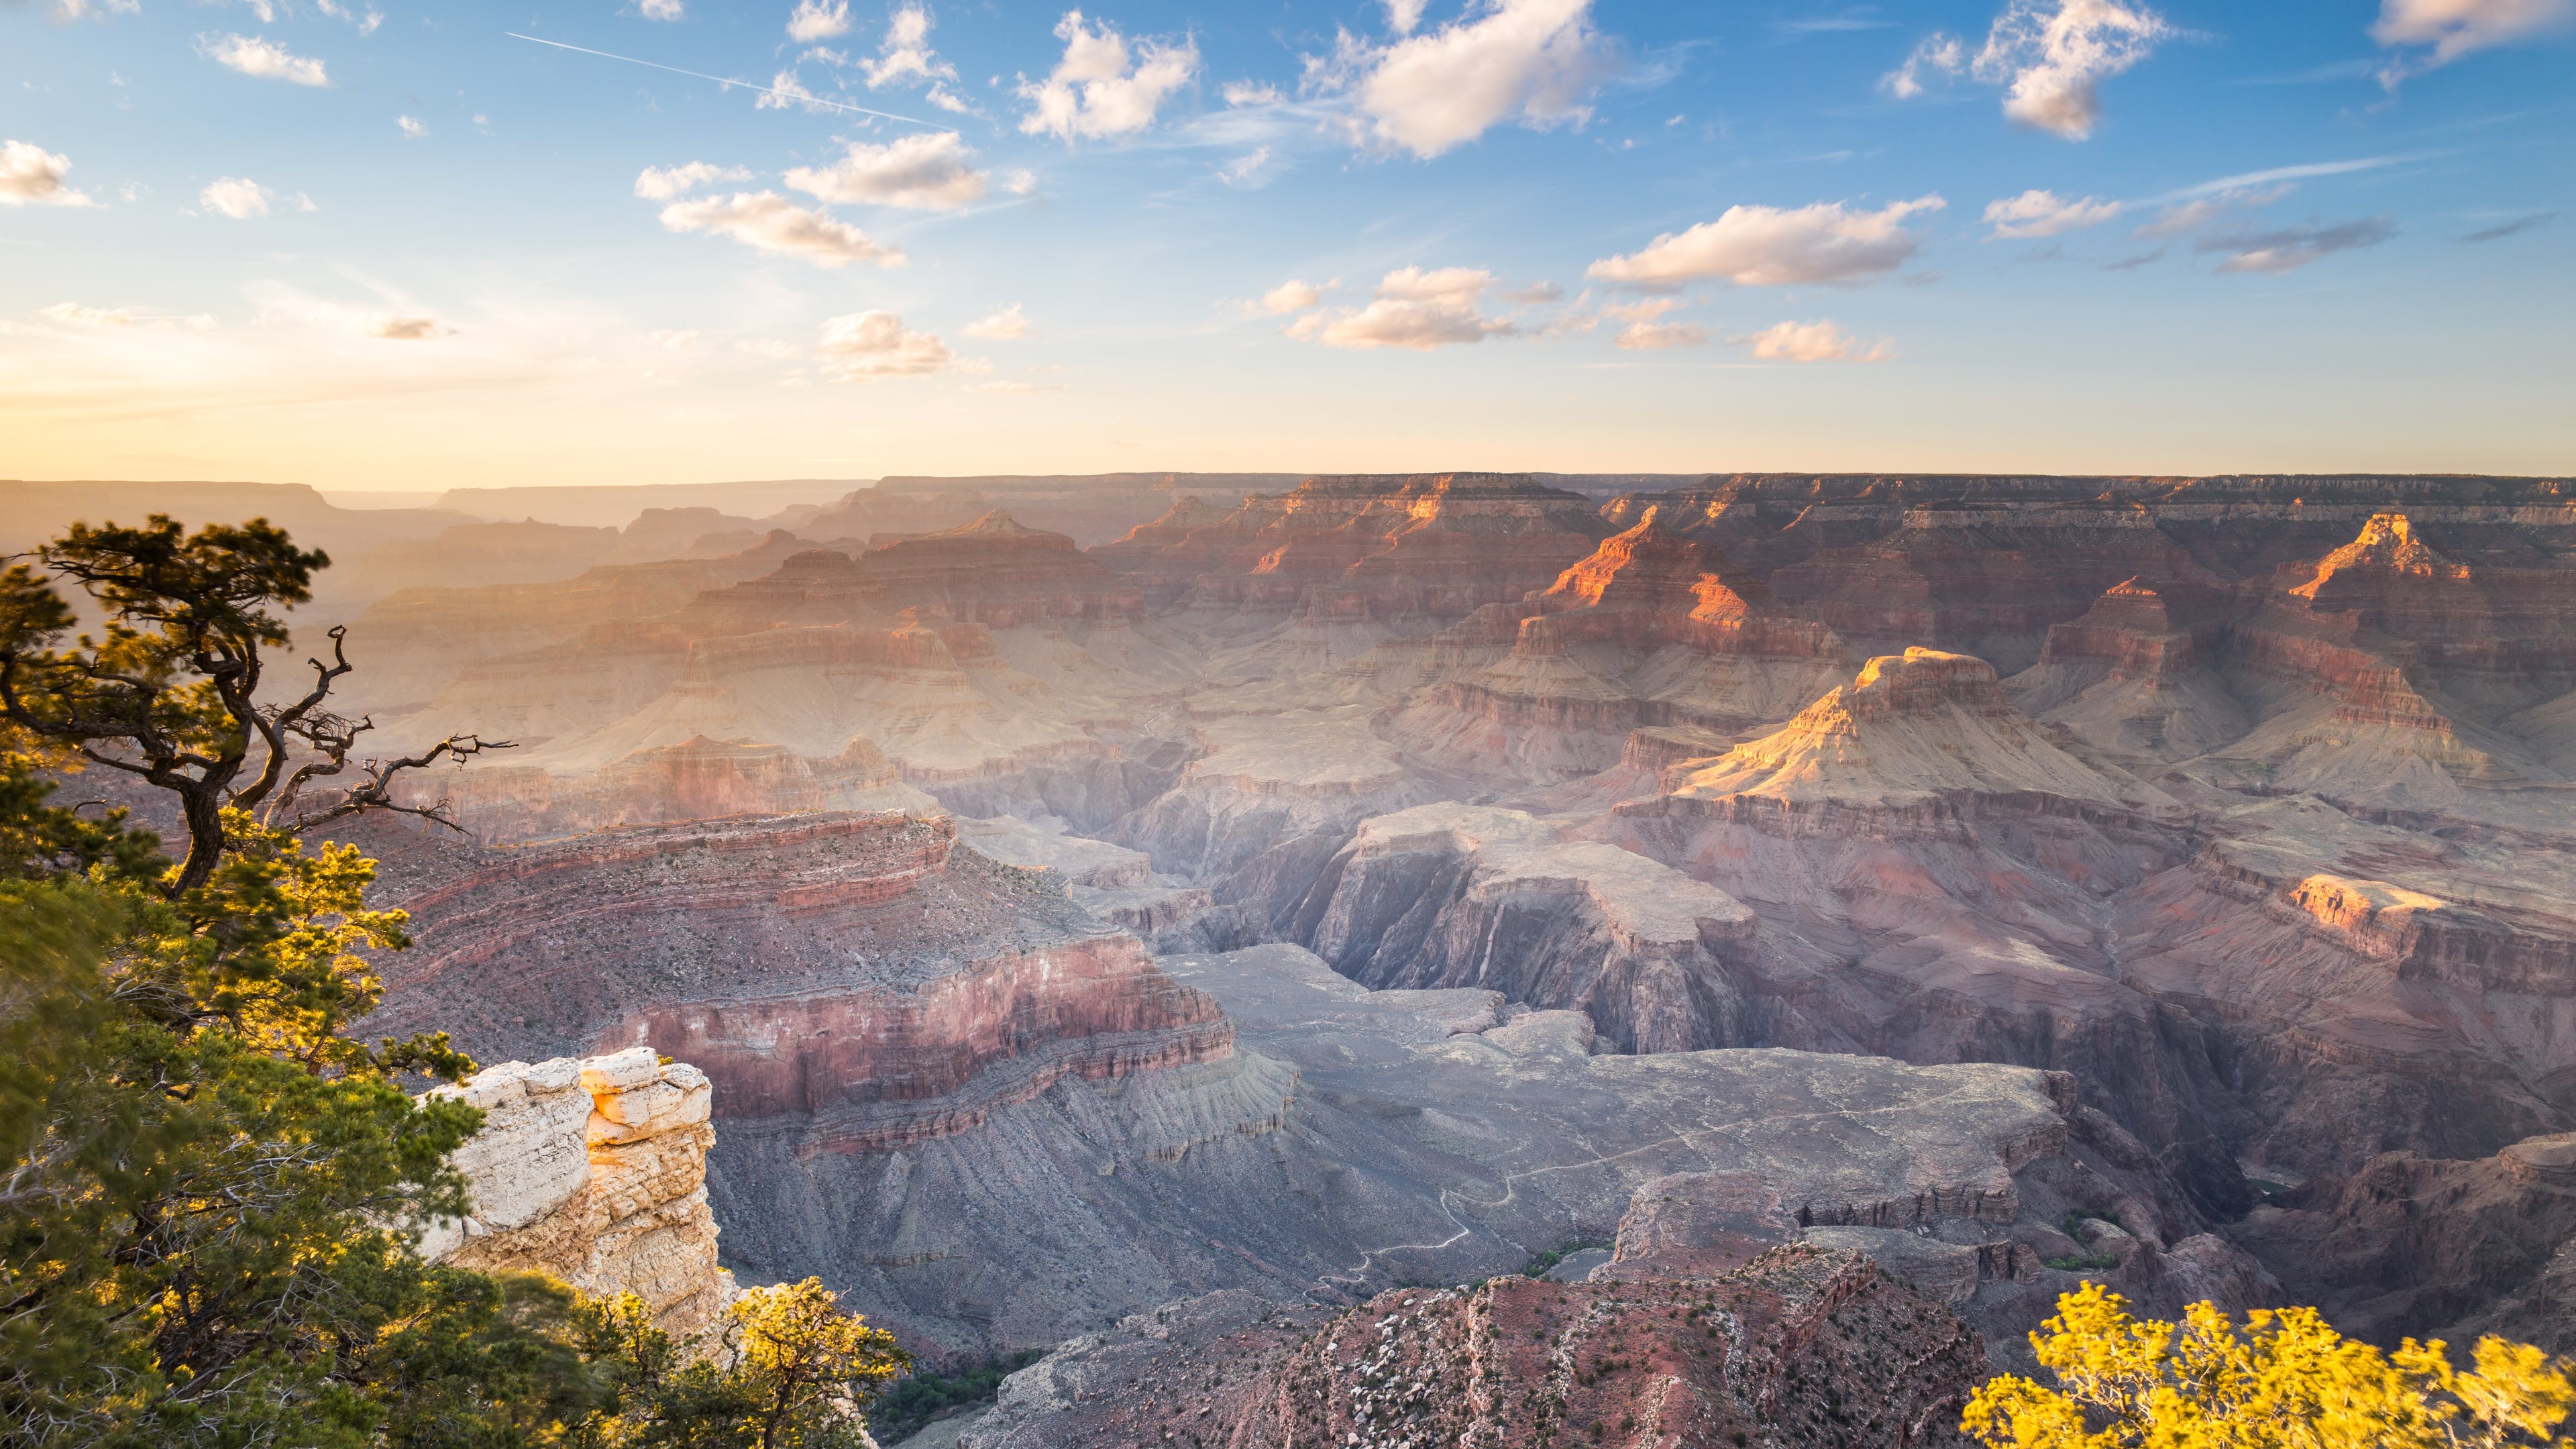 Grand Canyon Sunset Wallpapers For Android For Free - Romain Guy - HD Wallpaper 